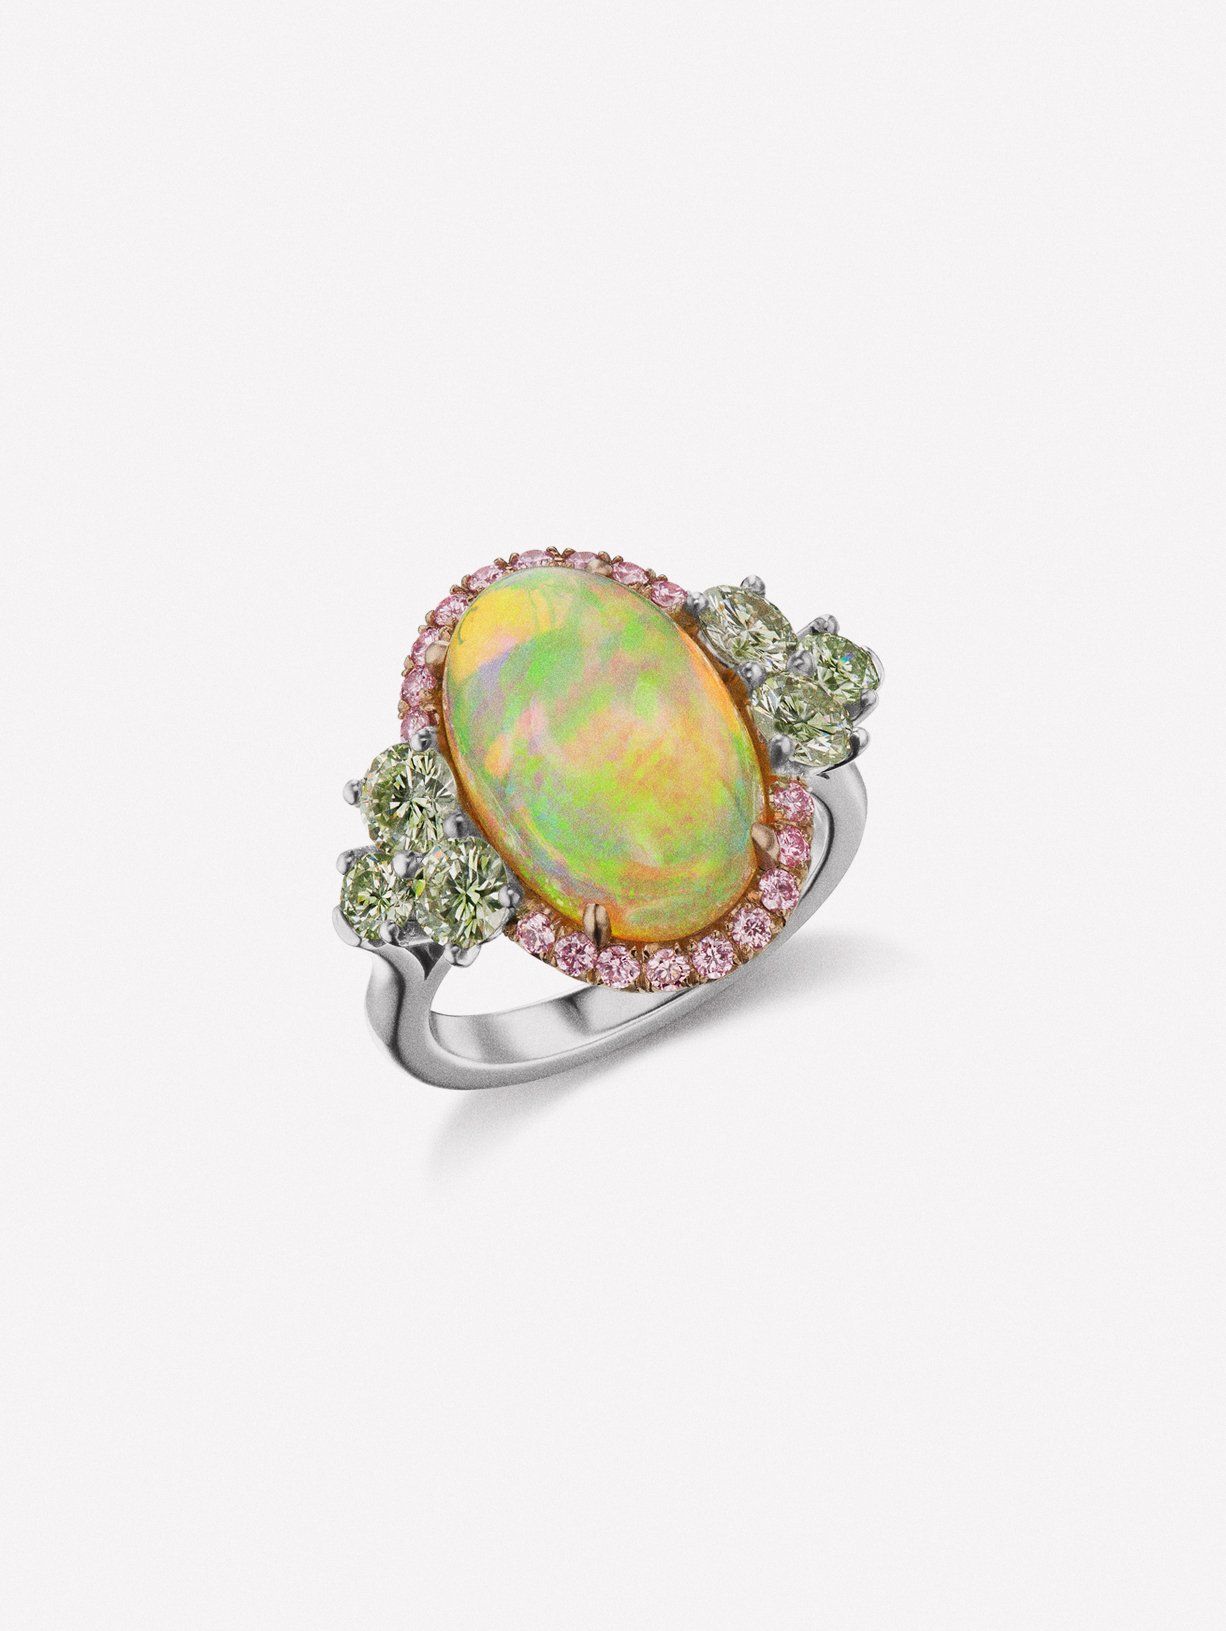 How do we feel about opal rings? : r/jewelry